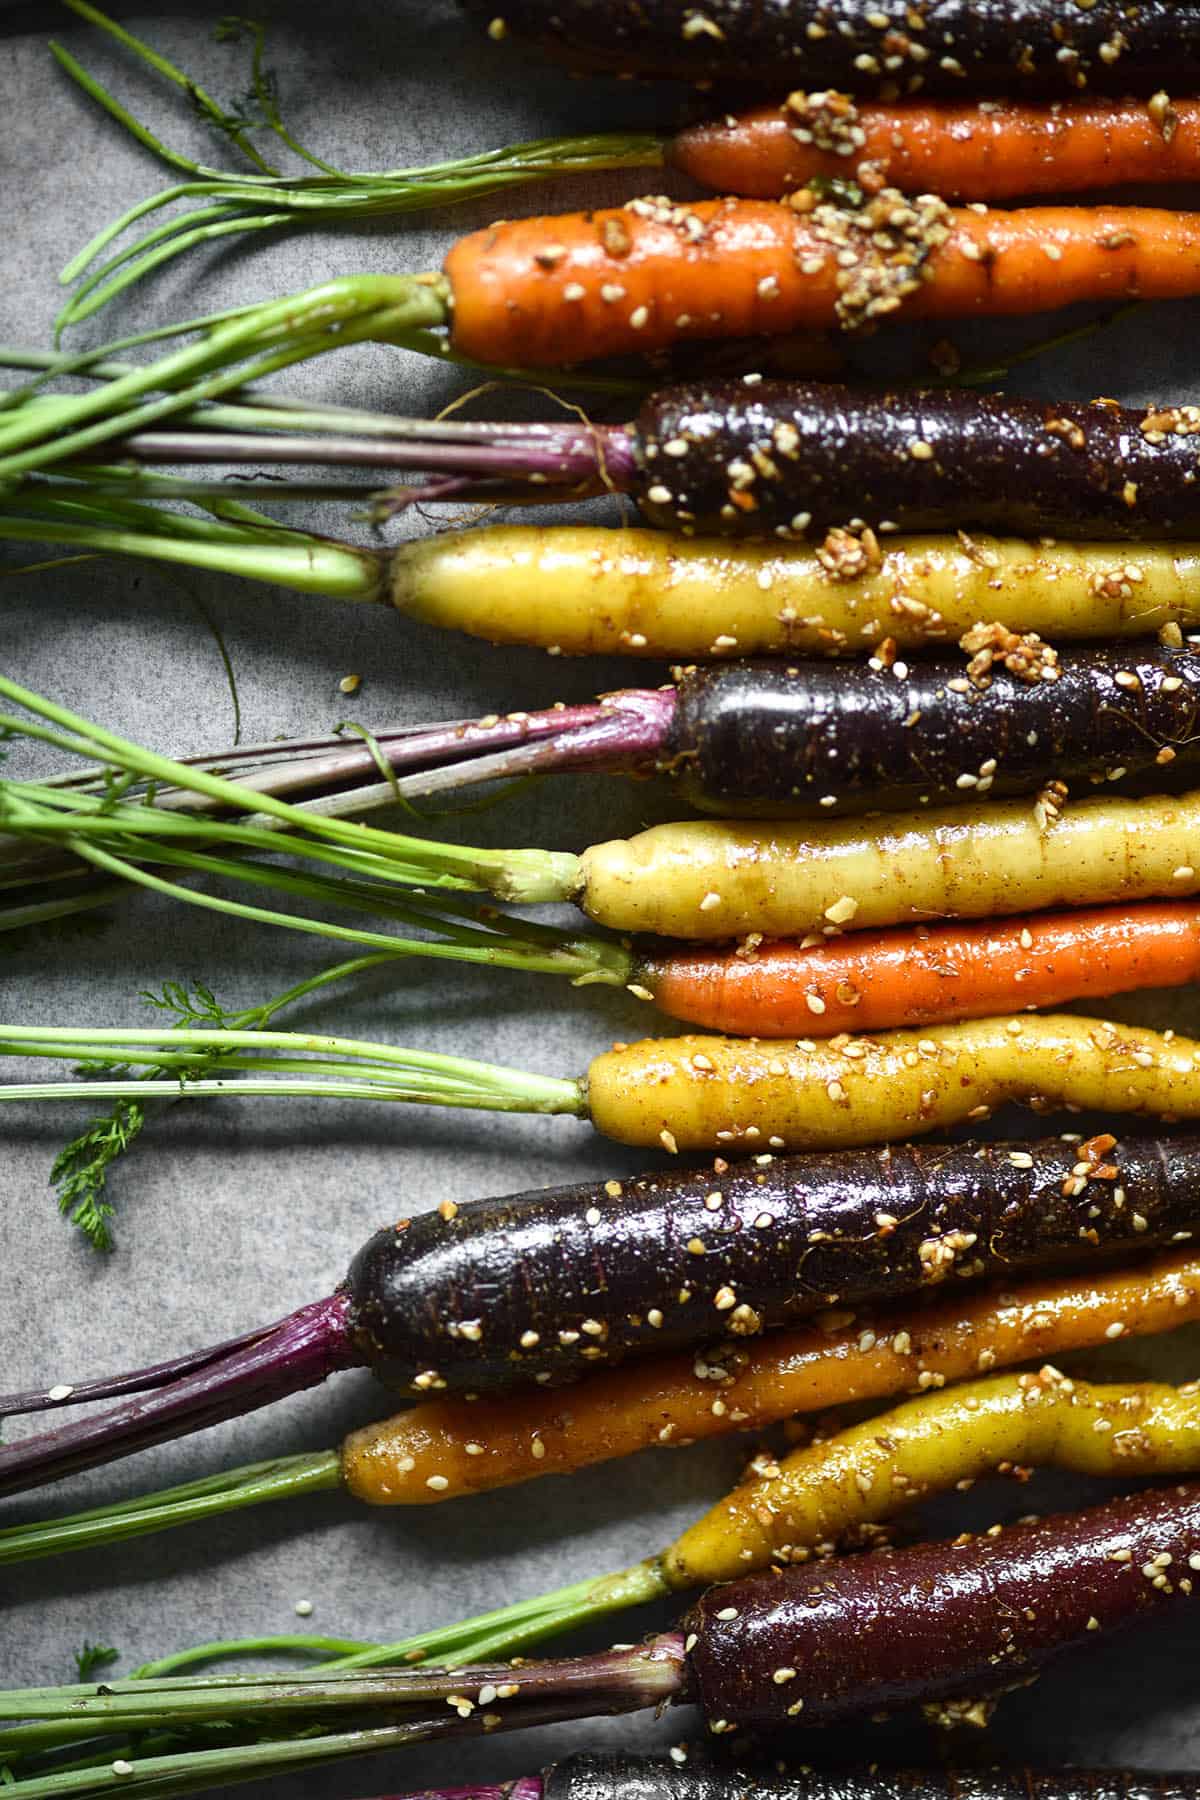 An aerial view of heirloom carrots lined up on a baking tray, smothered in oil and dukkah. The carrots are on the right side of the image and their tops extend off to the left of the image